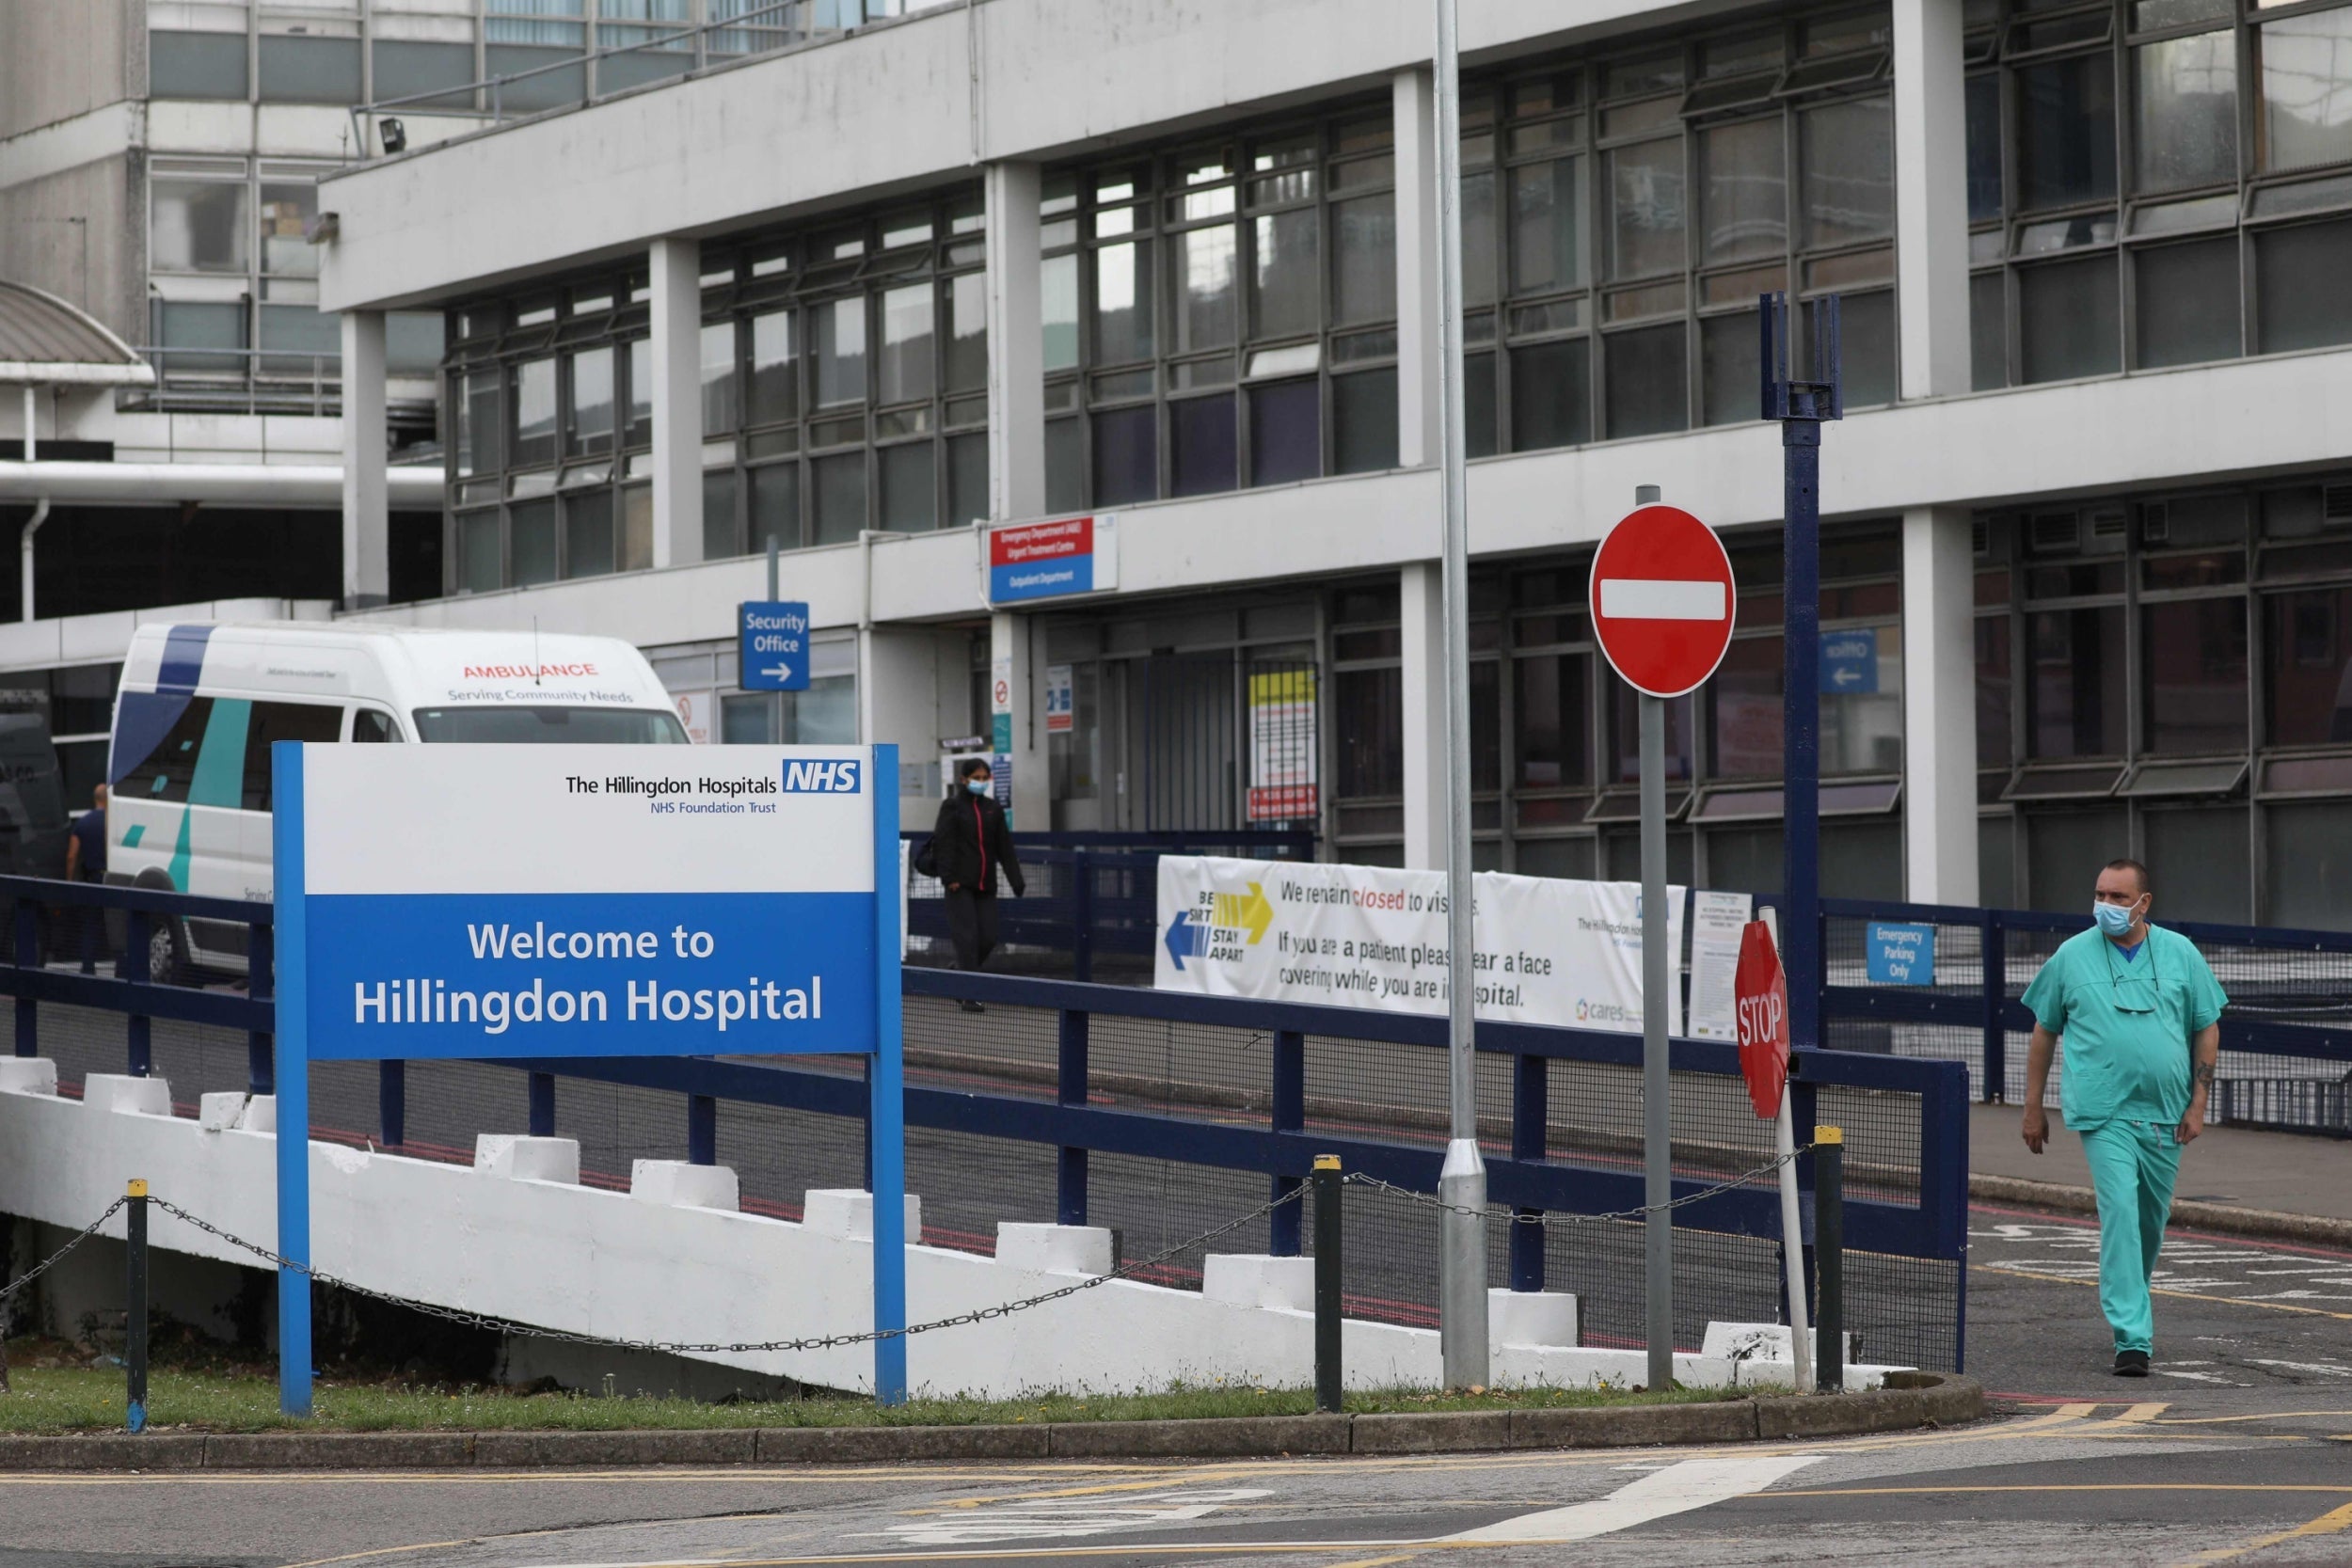 Hillingdon hospital in west London has closed to visitors due to a rise in Covid-19 cases